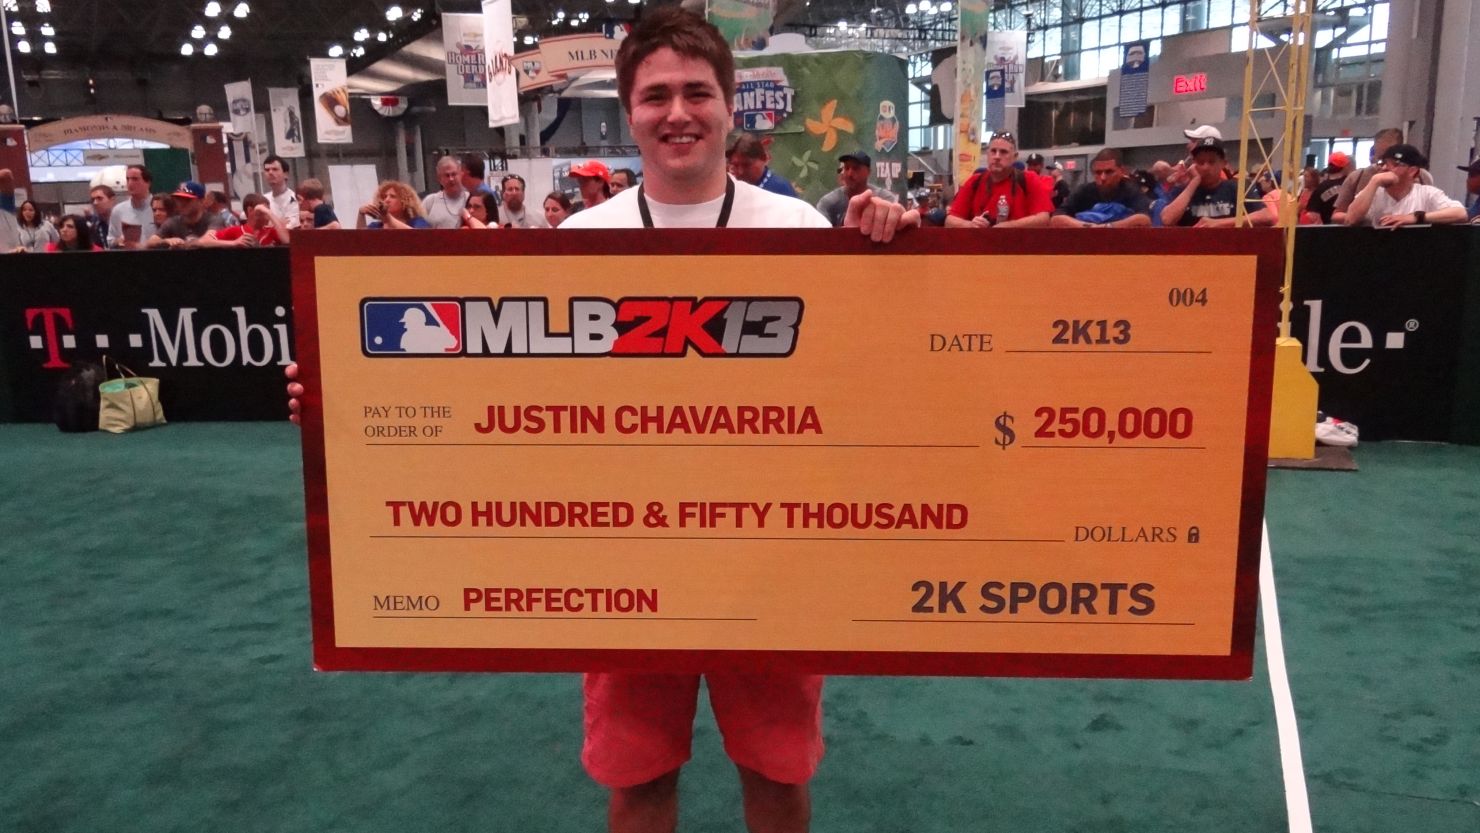 Justin Chavarria, 21, of Eugene, Oregon, hurled a perfect game on "MLB2K13" to reach the finals.